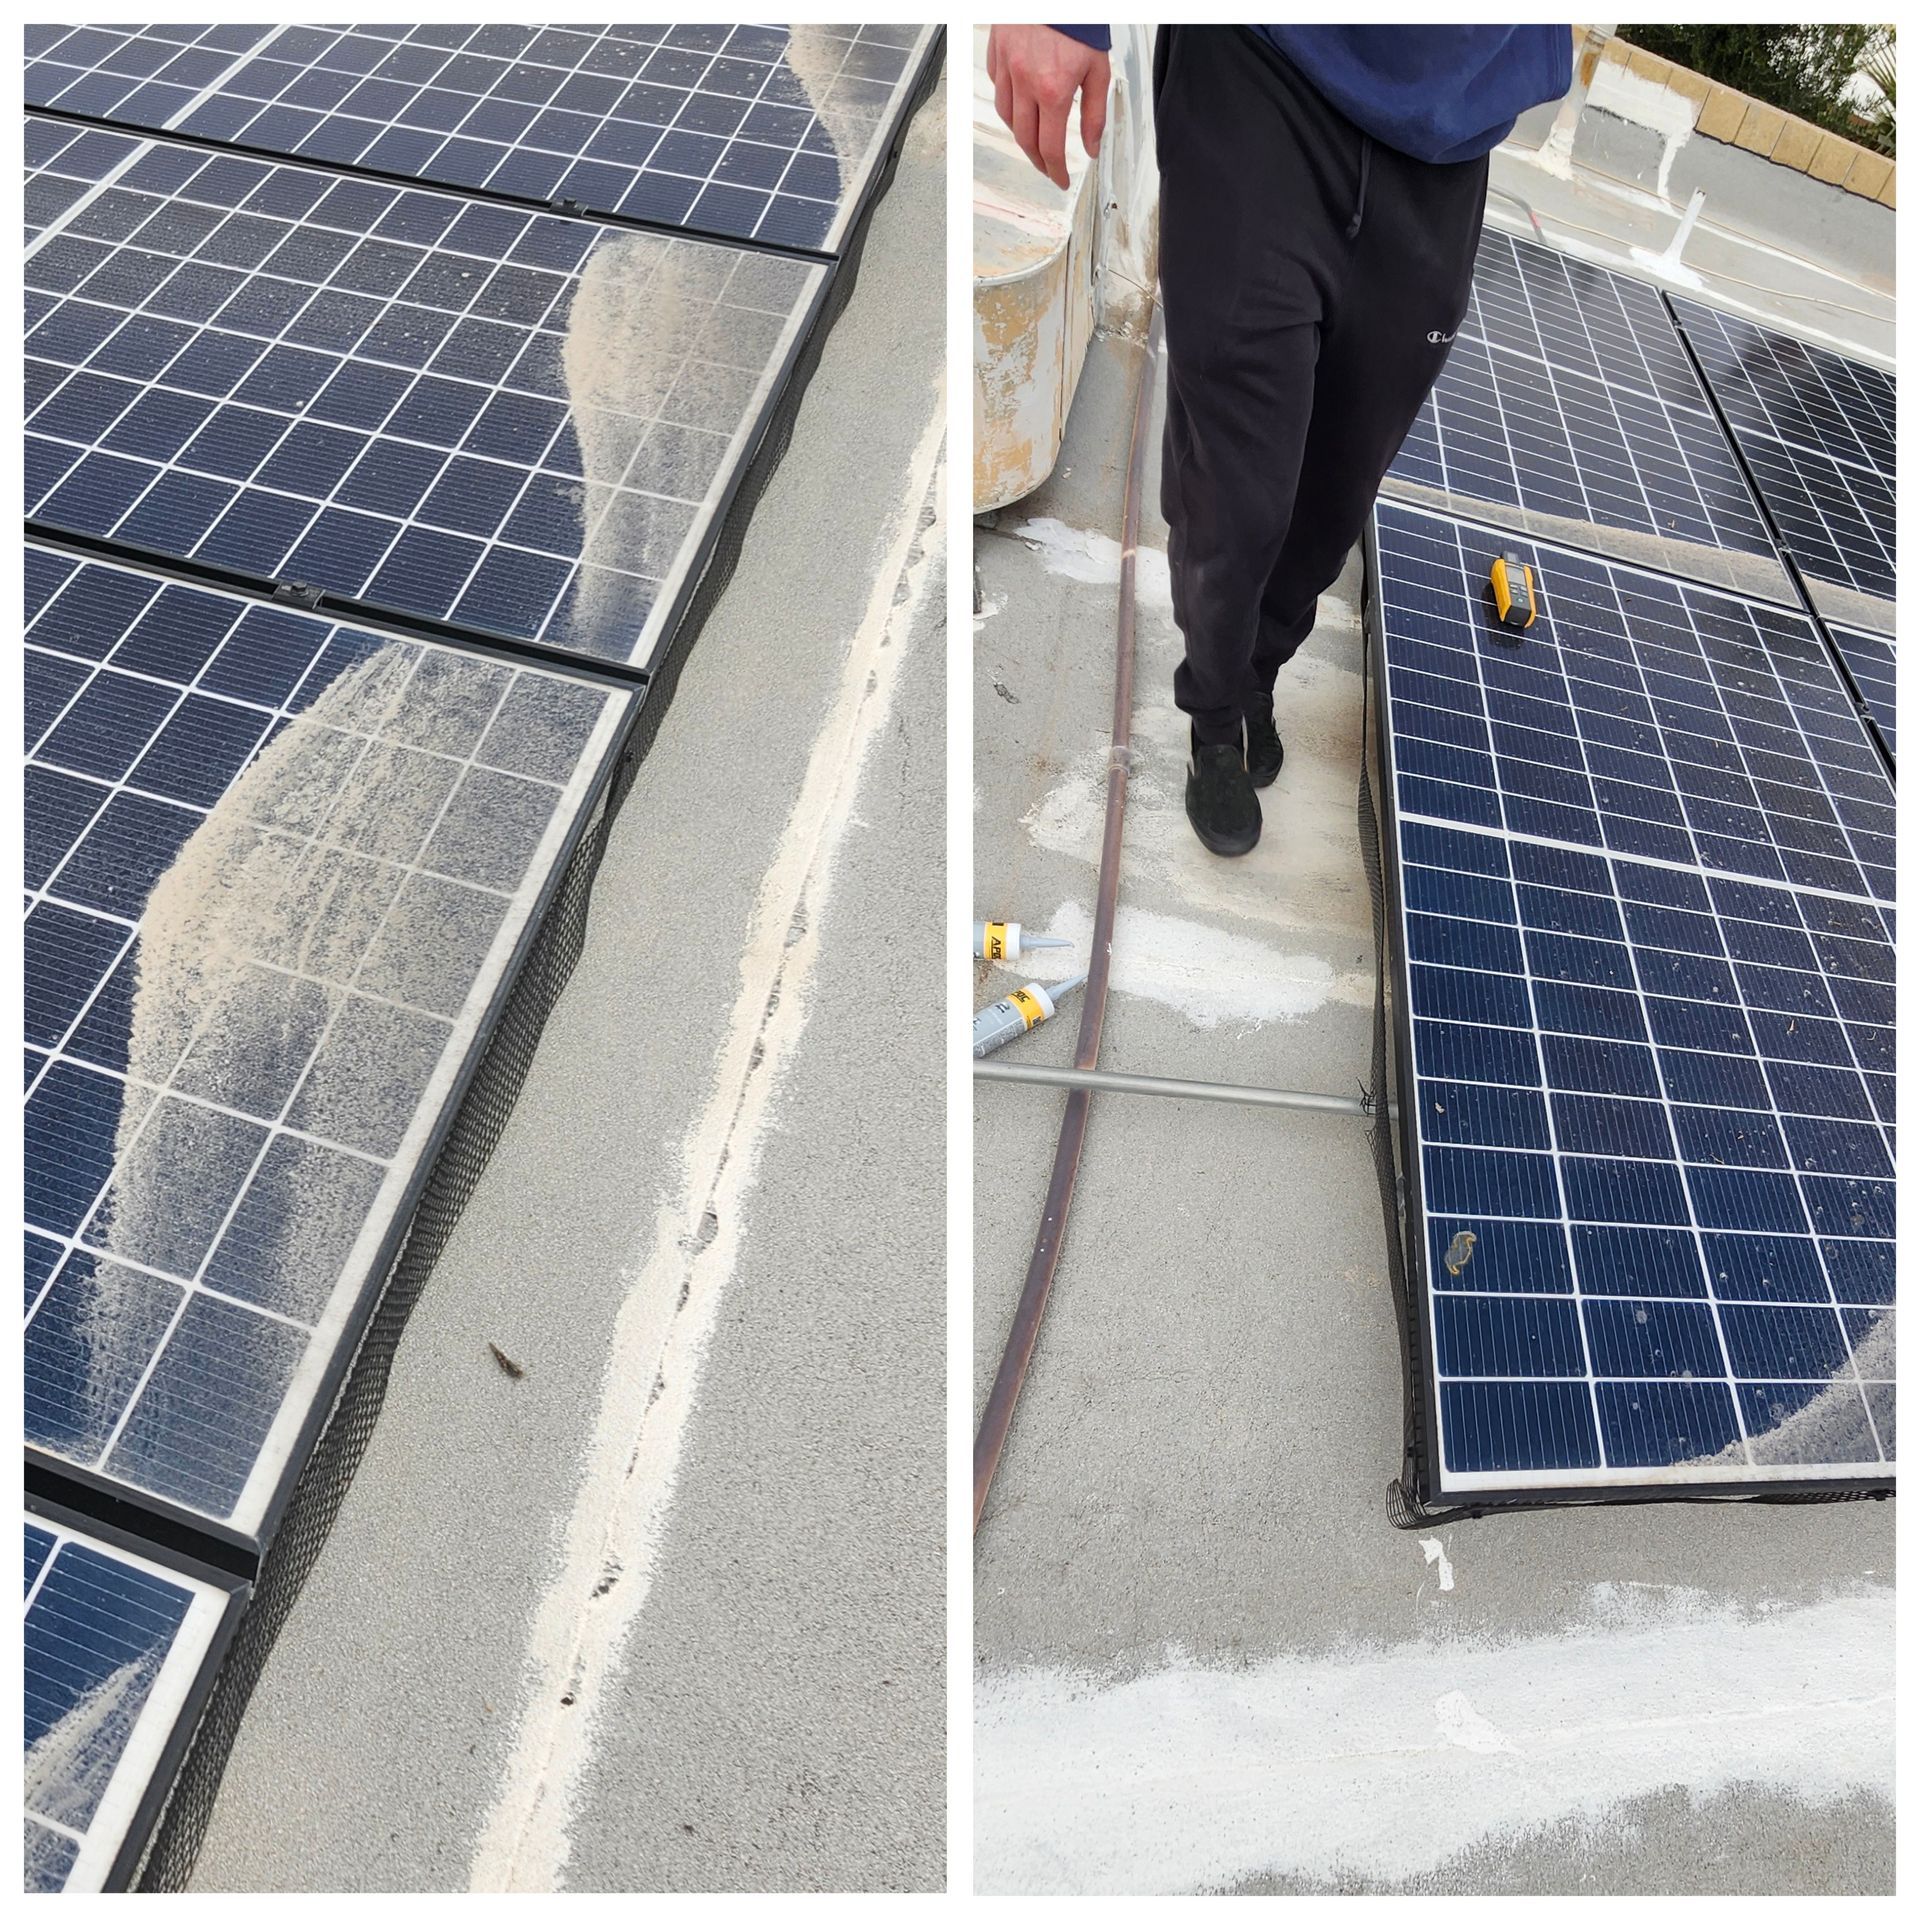 Flat Solar Panels cause dirt build-up due to improper draining